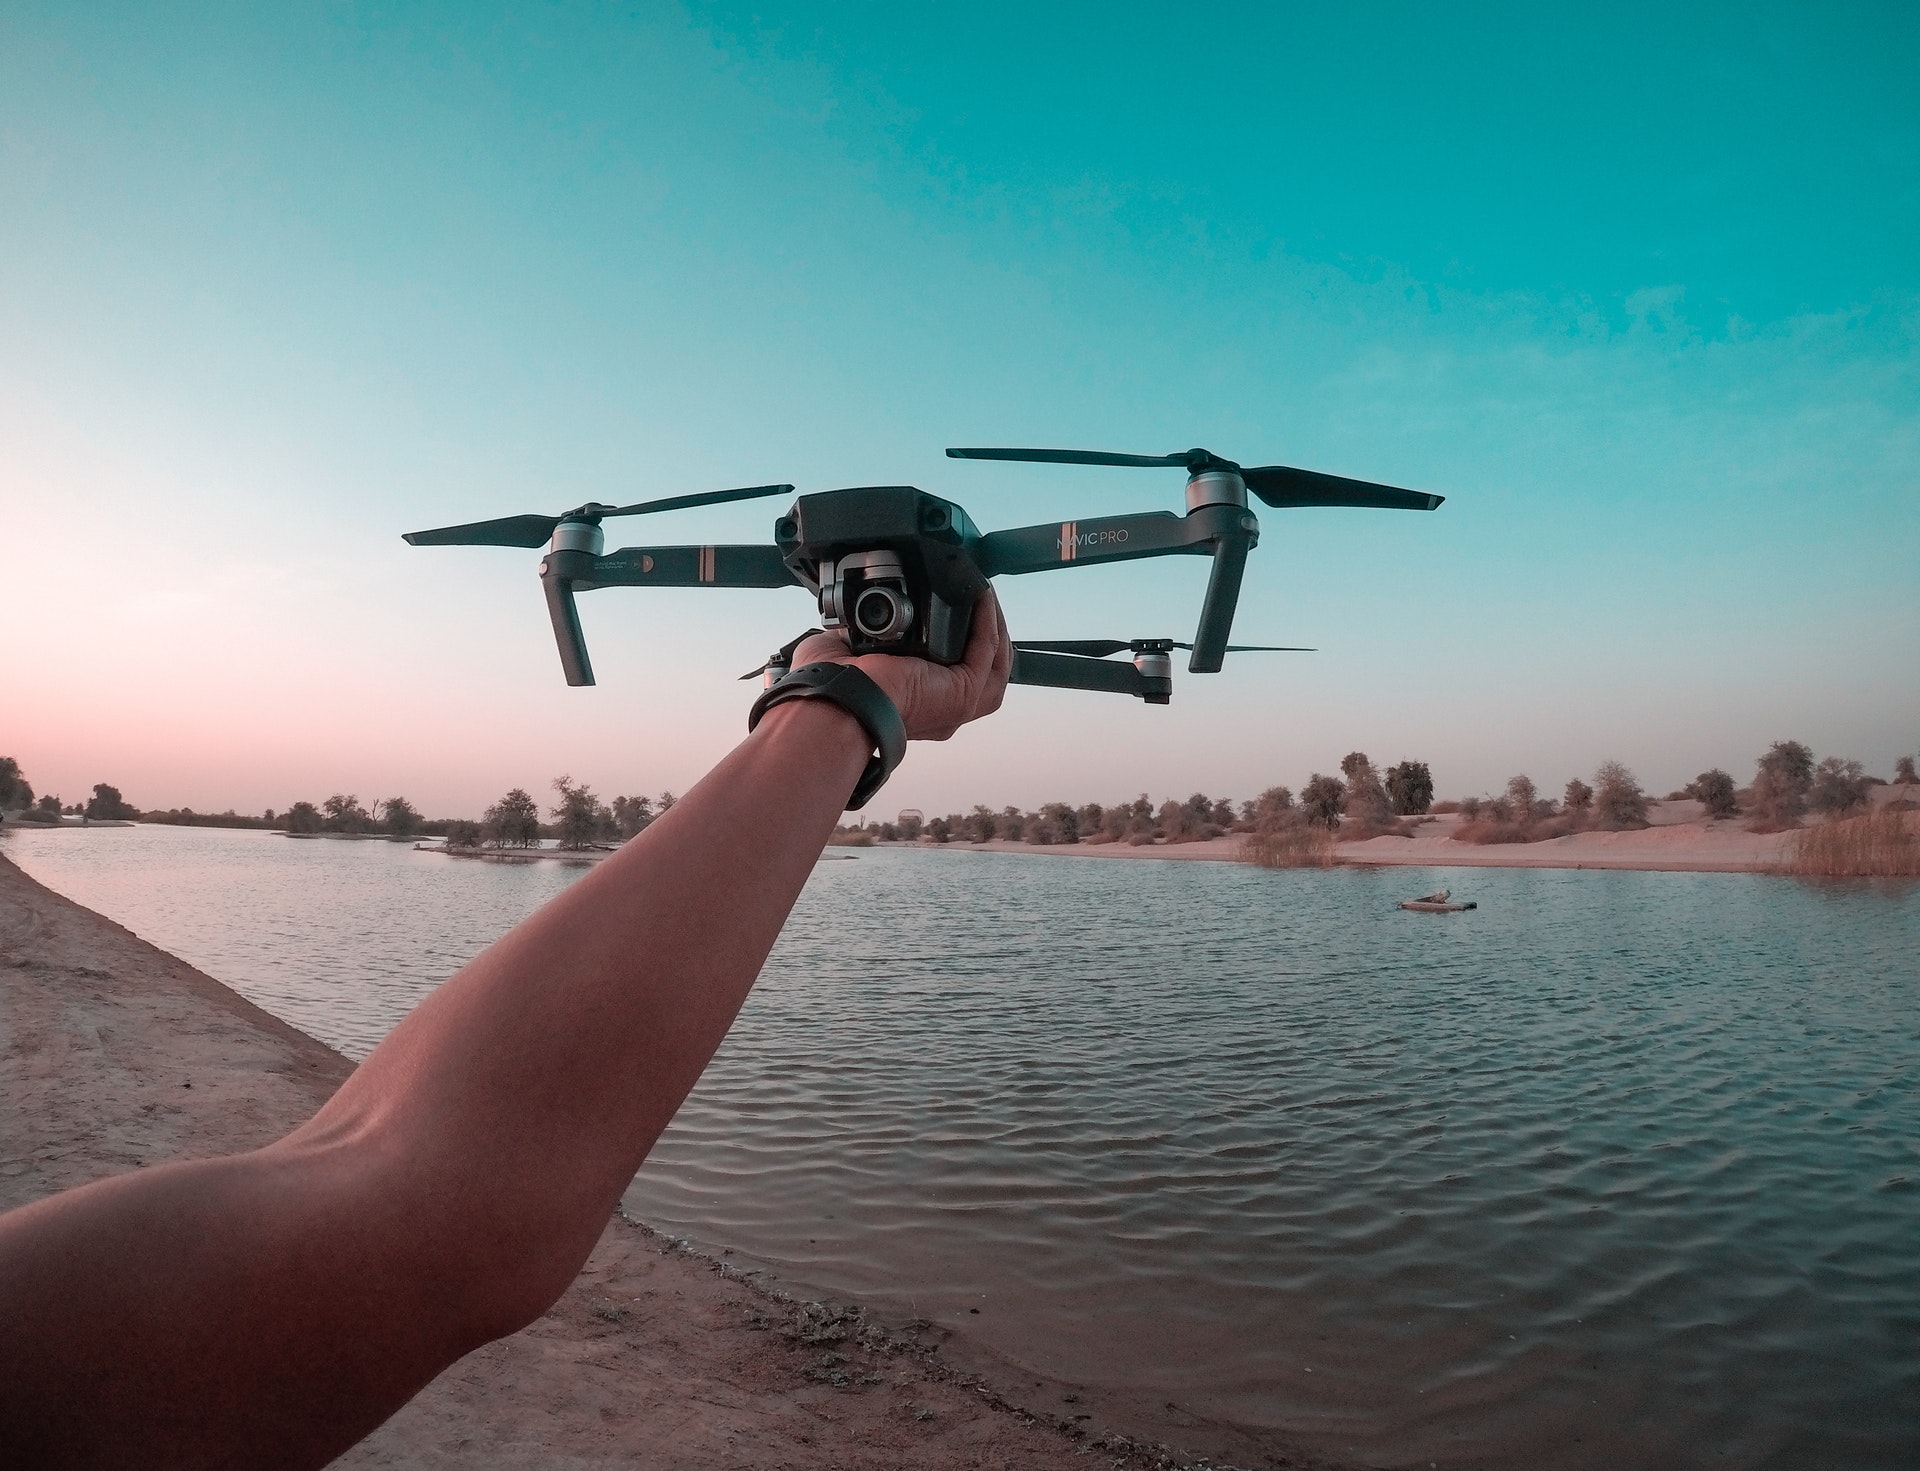 drone flying hobby, hand hold drone before flying near lake at sunset